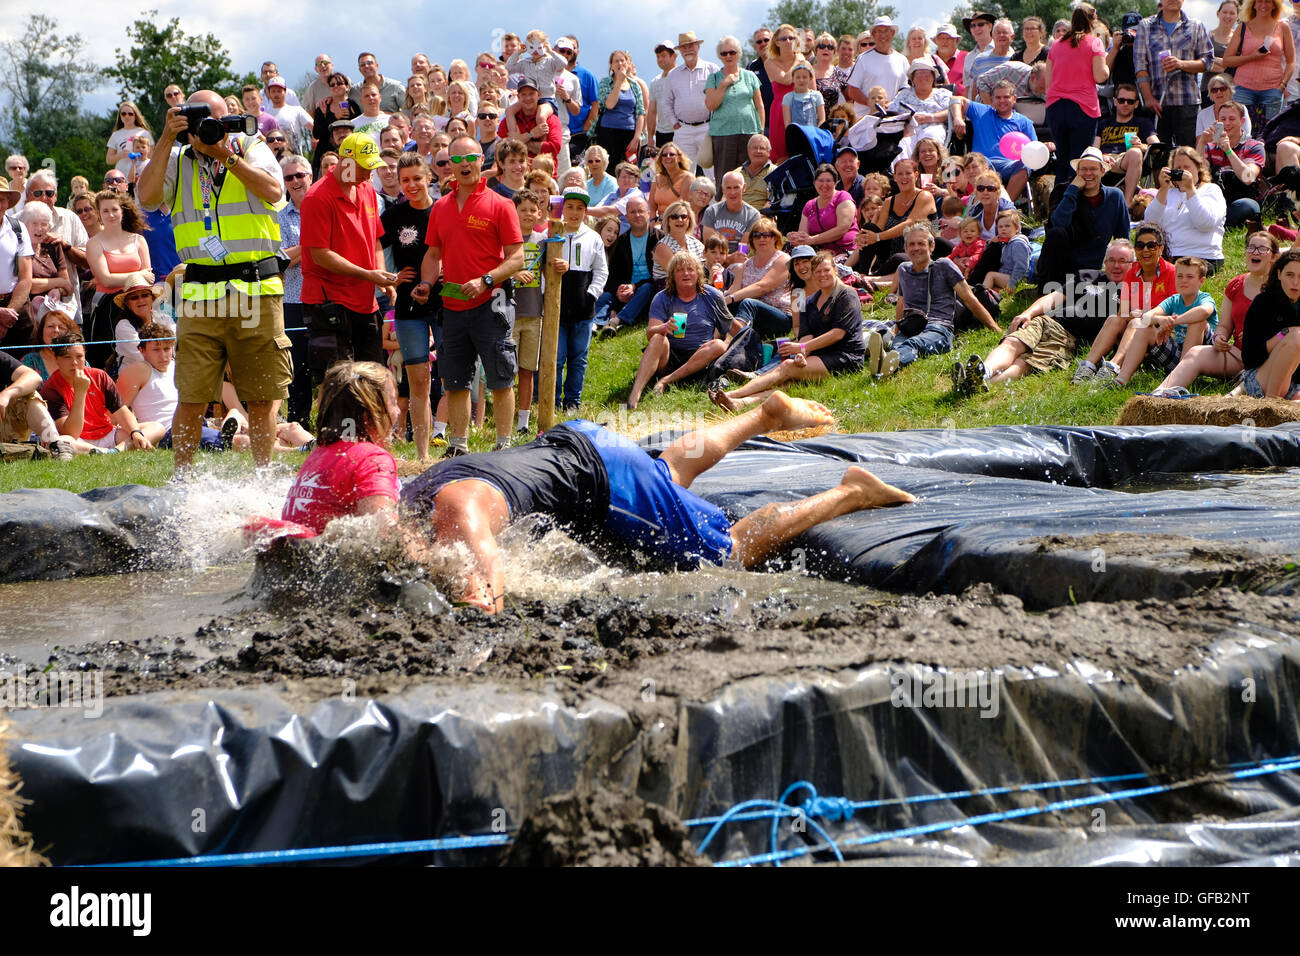 Lowland Games, Thorney, Somerset, UK, 31 July 2016: Competitors take part in the annual Lowland Games  “Wife Carrying” race in Somerset. Hundreds turned out in the heat to watch the Lowland Games which includes such events as a Raft Race, Hay Bale Racing , River its a Knock Out, Mud Wrestling, and Chunder Challenge. The games, originally started in 1984, are held annually in the Lowland village of Thorney which became flooded for the first time in centuries during the Somerset floods in January 2014. Stock Photo